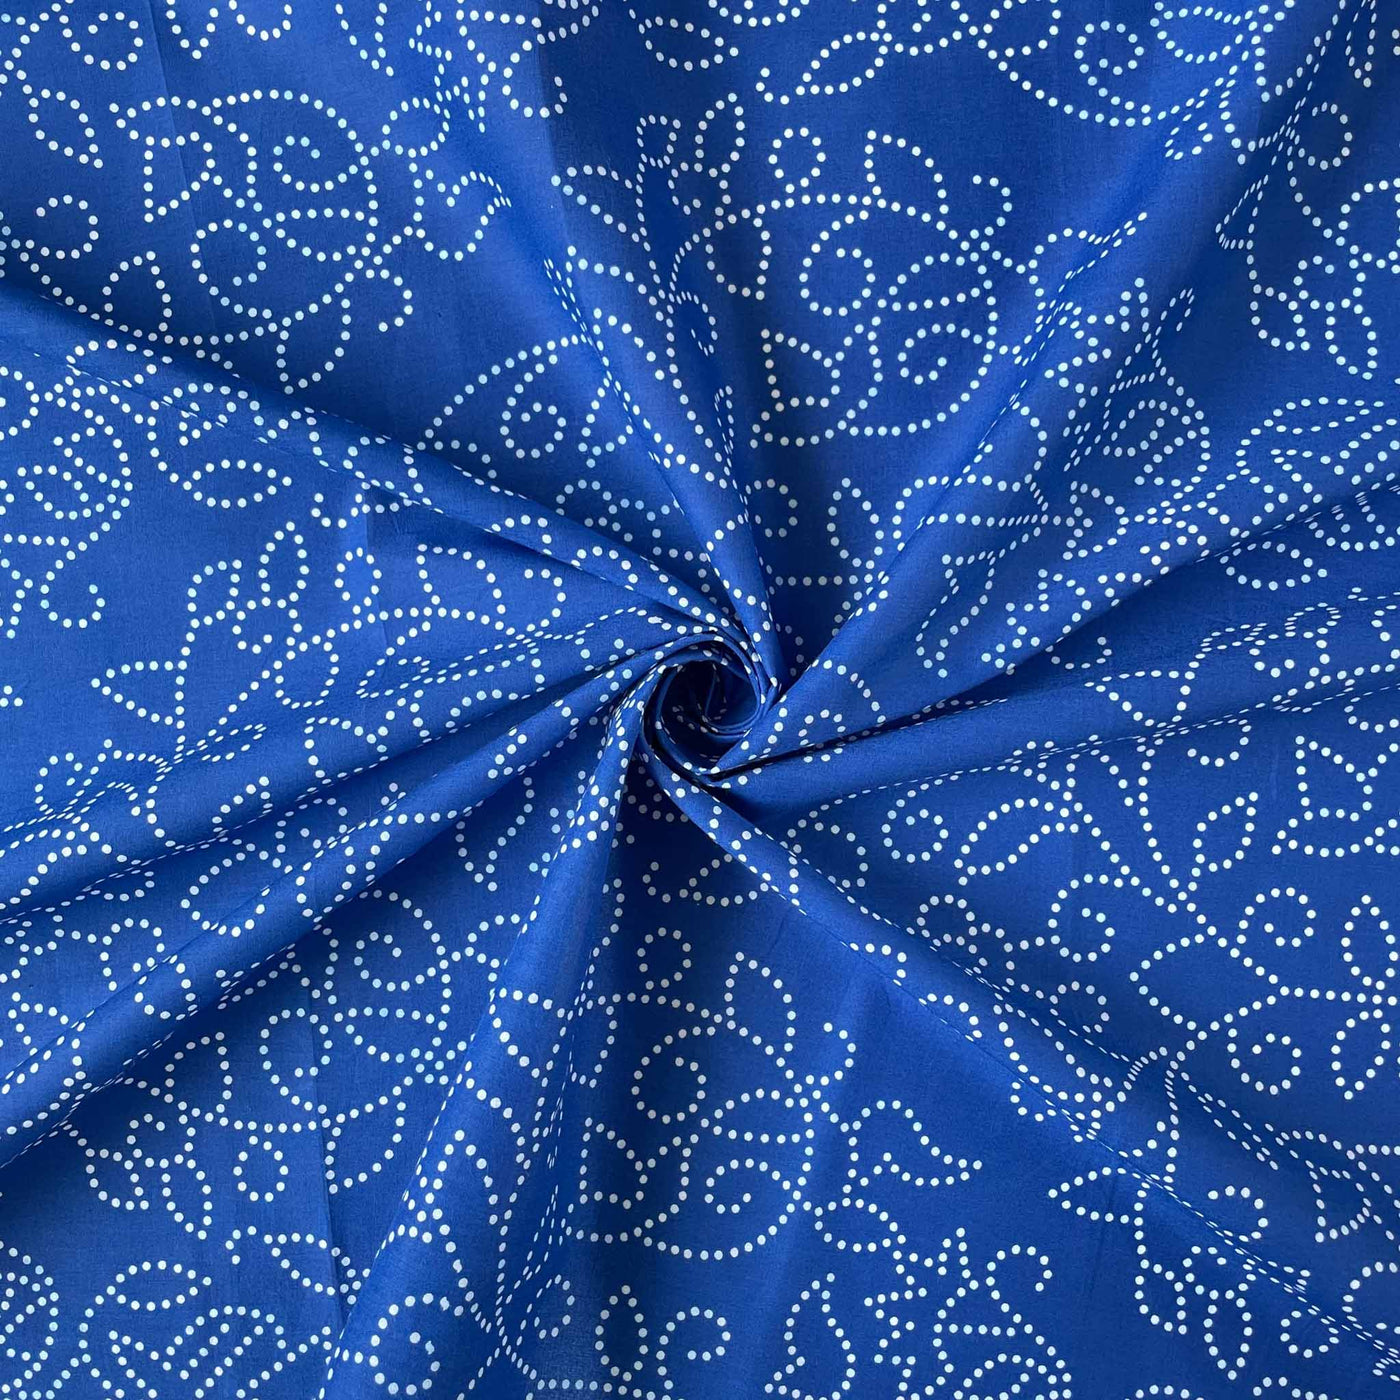 Fabric Pandit Cut Piece (Cut Piece) Bright Blue Floral Vines All Over Bandhani Pattern Hand Block Printed Pure Cotton Fabric Width (43 inches)